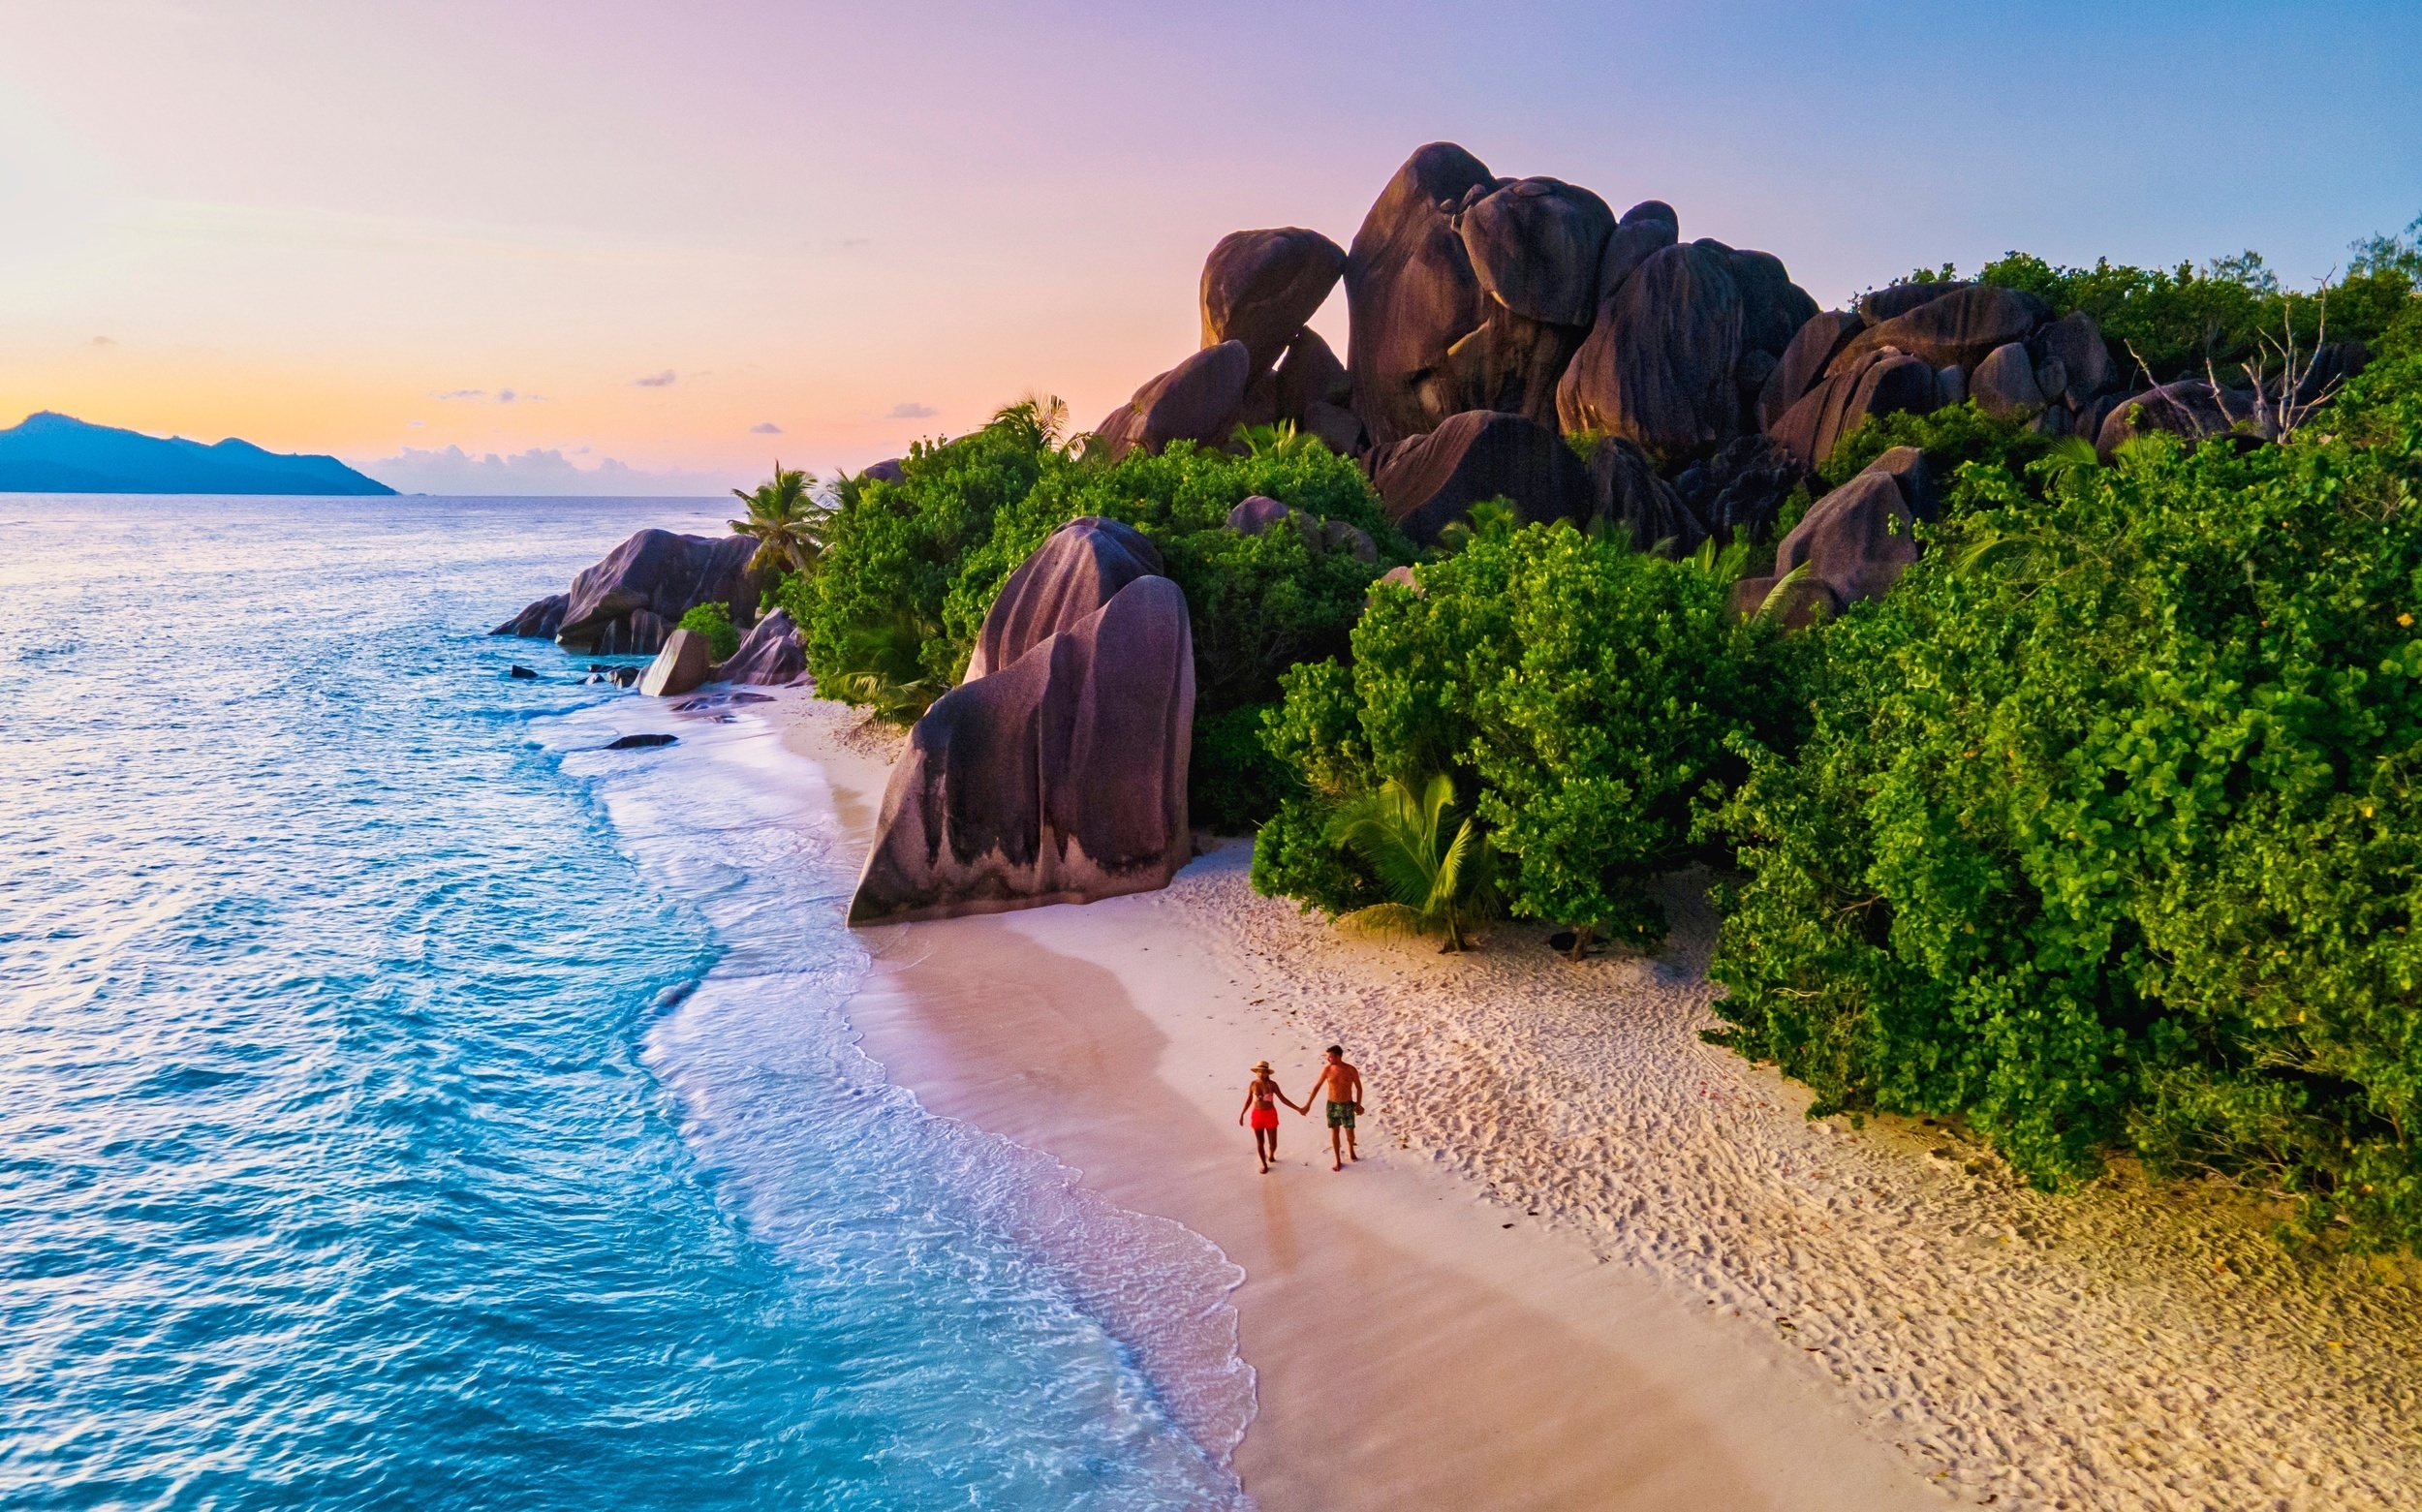 <p>The Seychelles are a remote group of islands off the eastern coast of Africa. Because of the distance, United States citizens find it tough to get to, but visitors cite it as one of the most beautiful destinations on the planet. </p><p><a href='https://www.msn.com/en-us/community/channel/vid-cj9pqbr0vn9in2b6ddcd8sfgpfq6x6utp44fssrv6mc2gtybw0us'>Follow us on MSN to see more of our exclusive lifestyle content.</a></p>